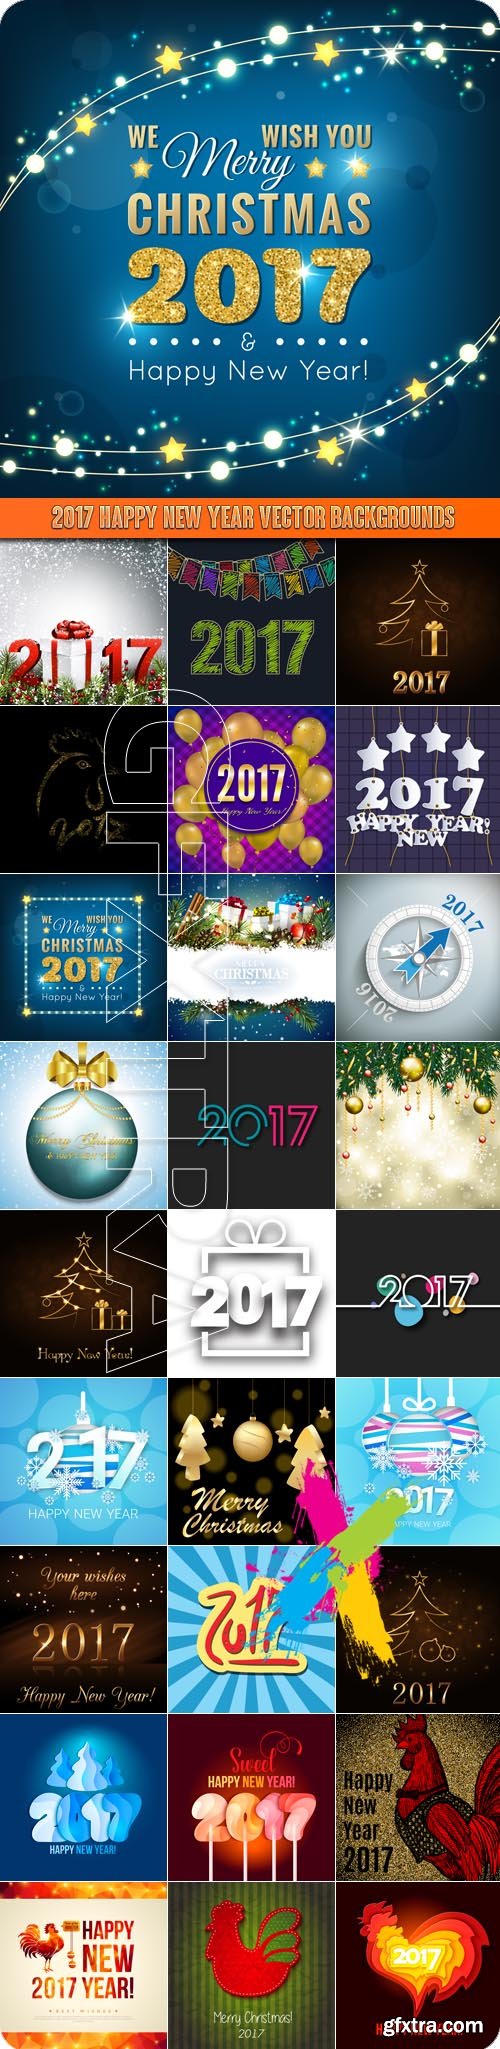 2017 Happy New Year vector backgrounds